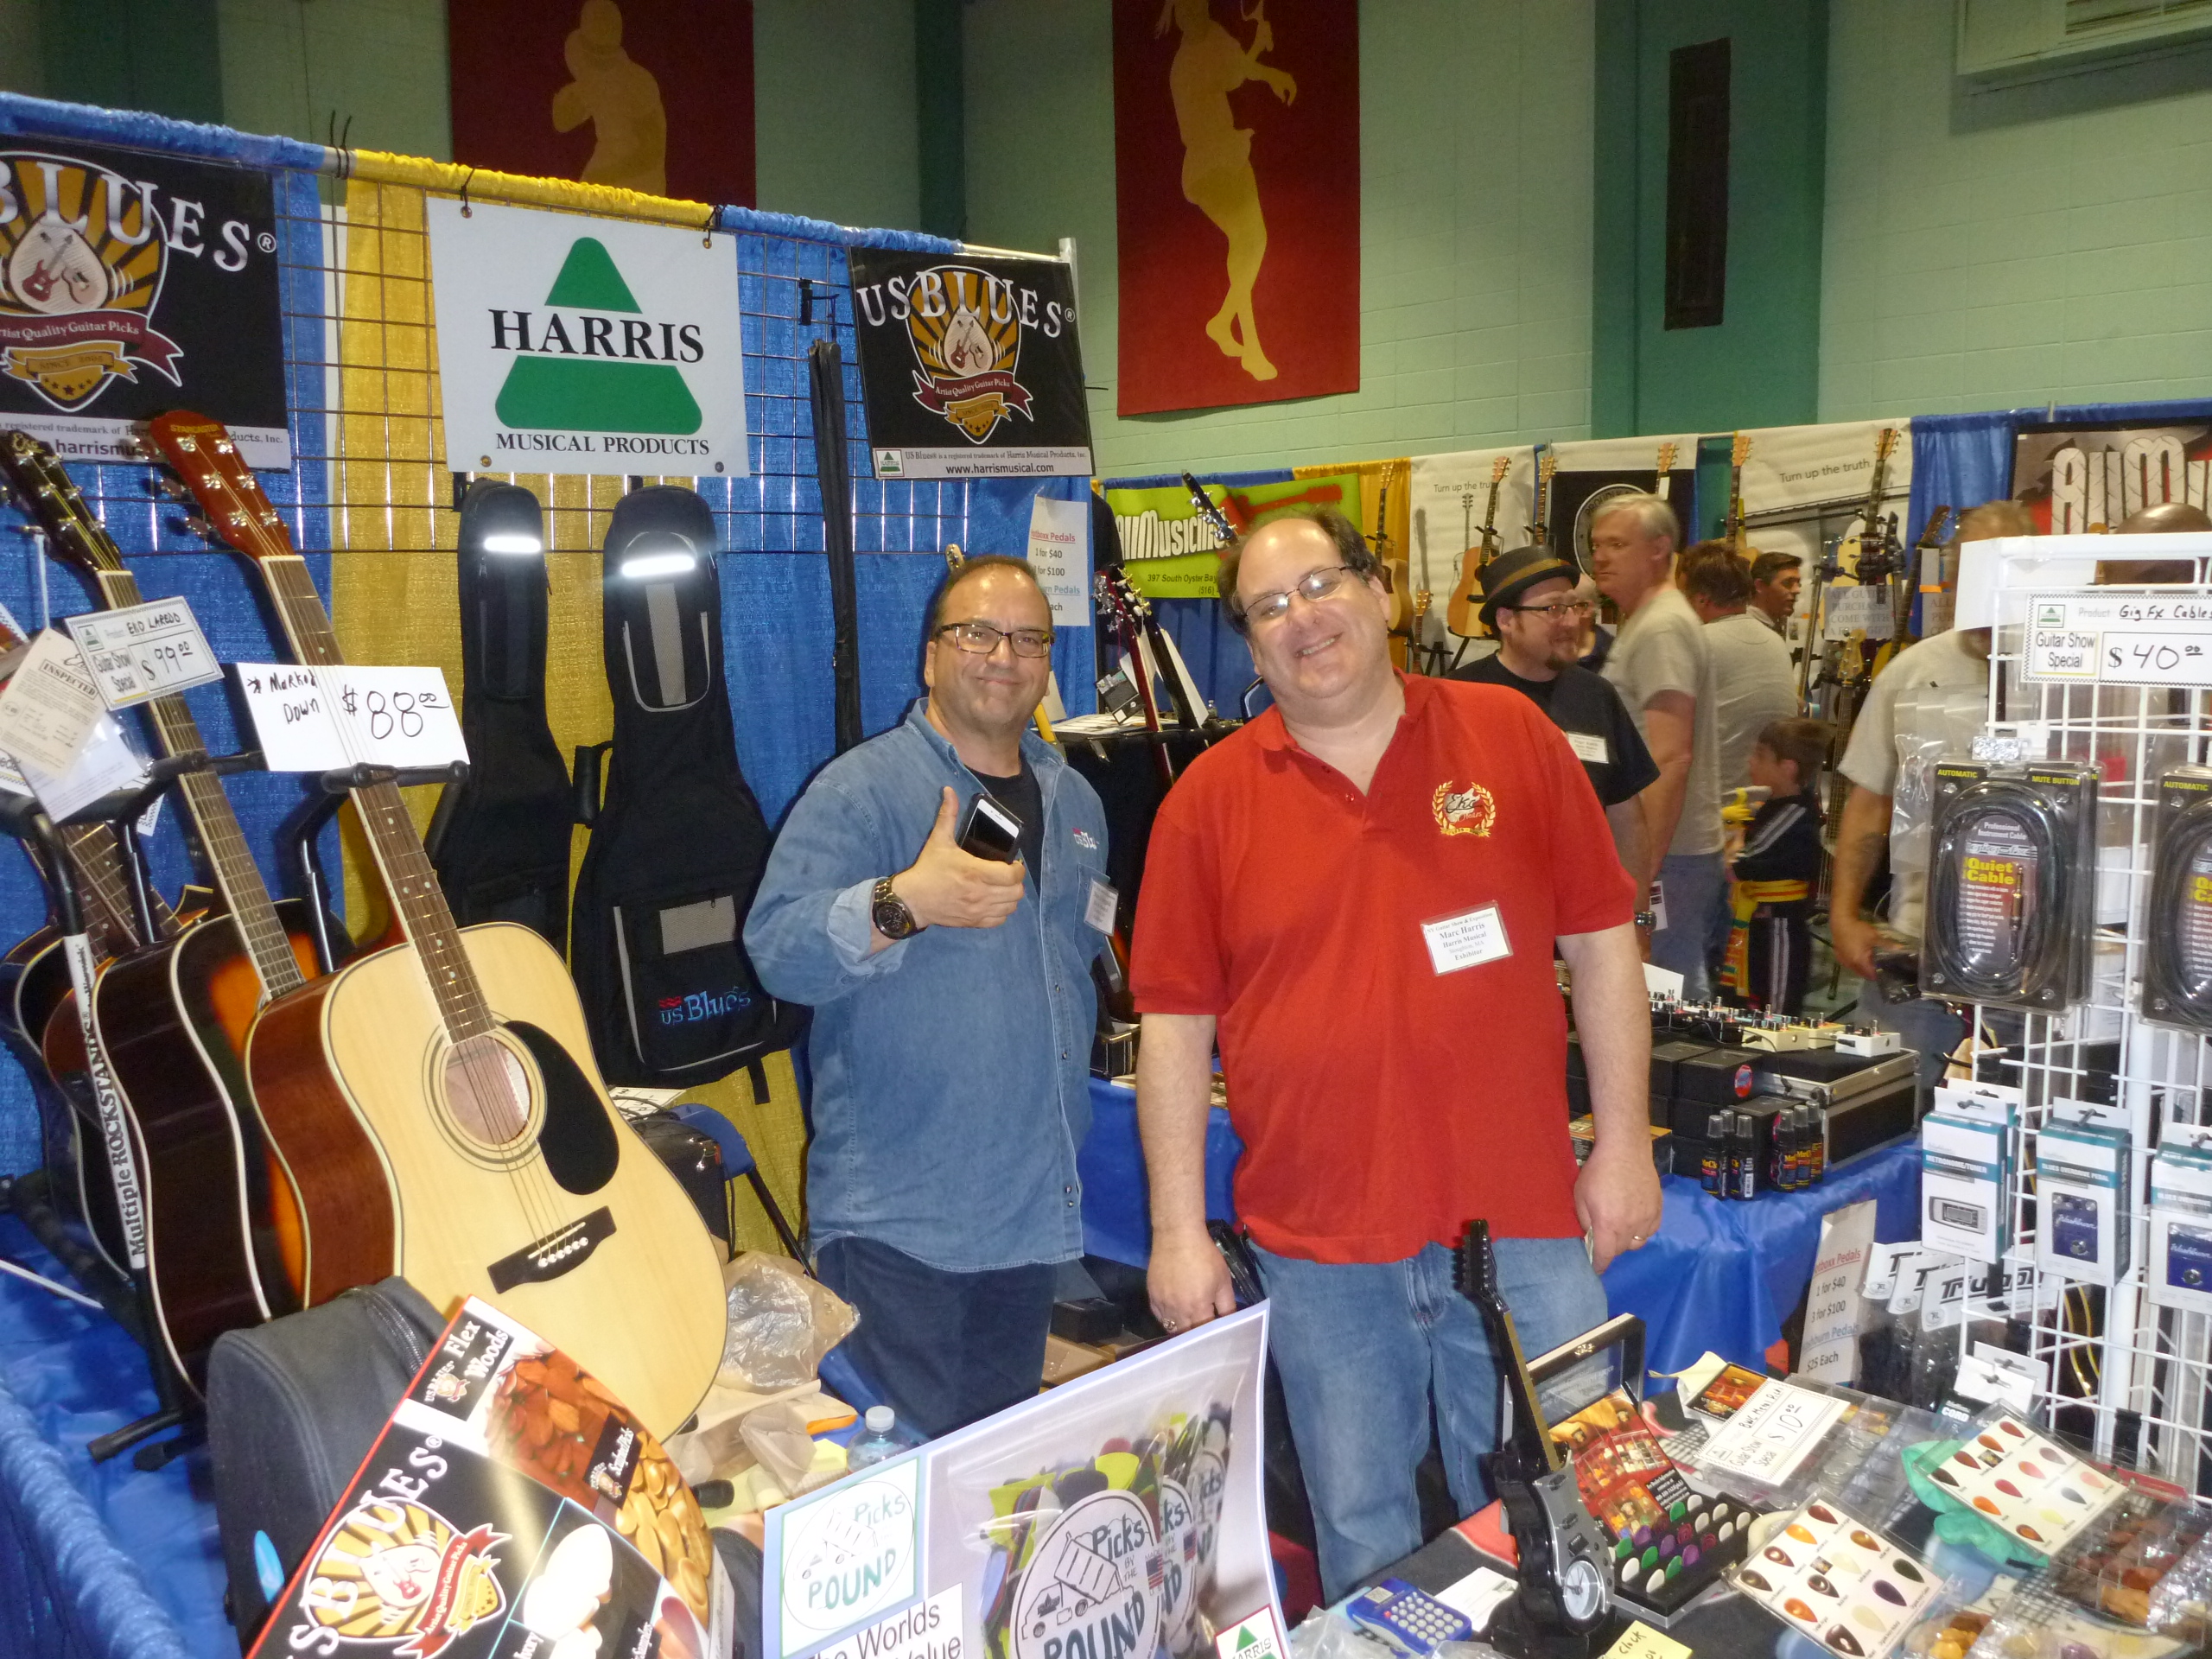 The Harris brothers show they are enjoying the 4th Annual NY Guitar Show.